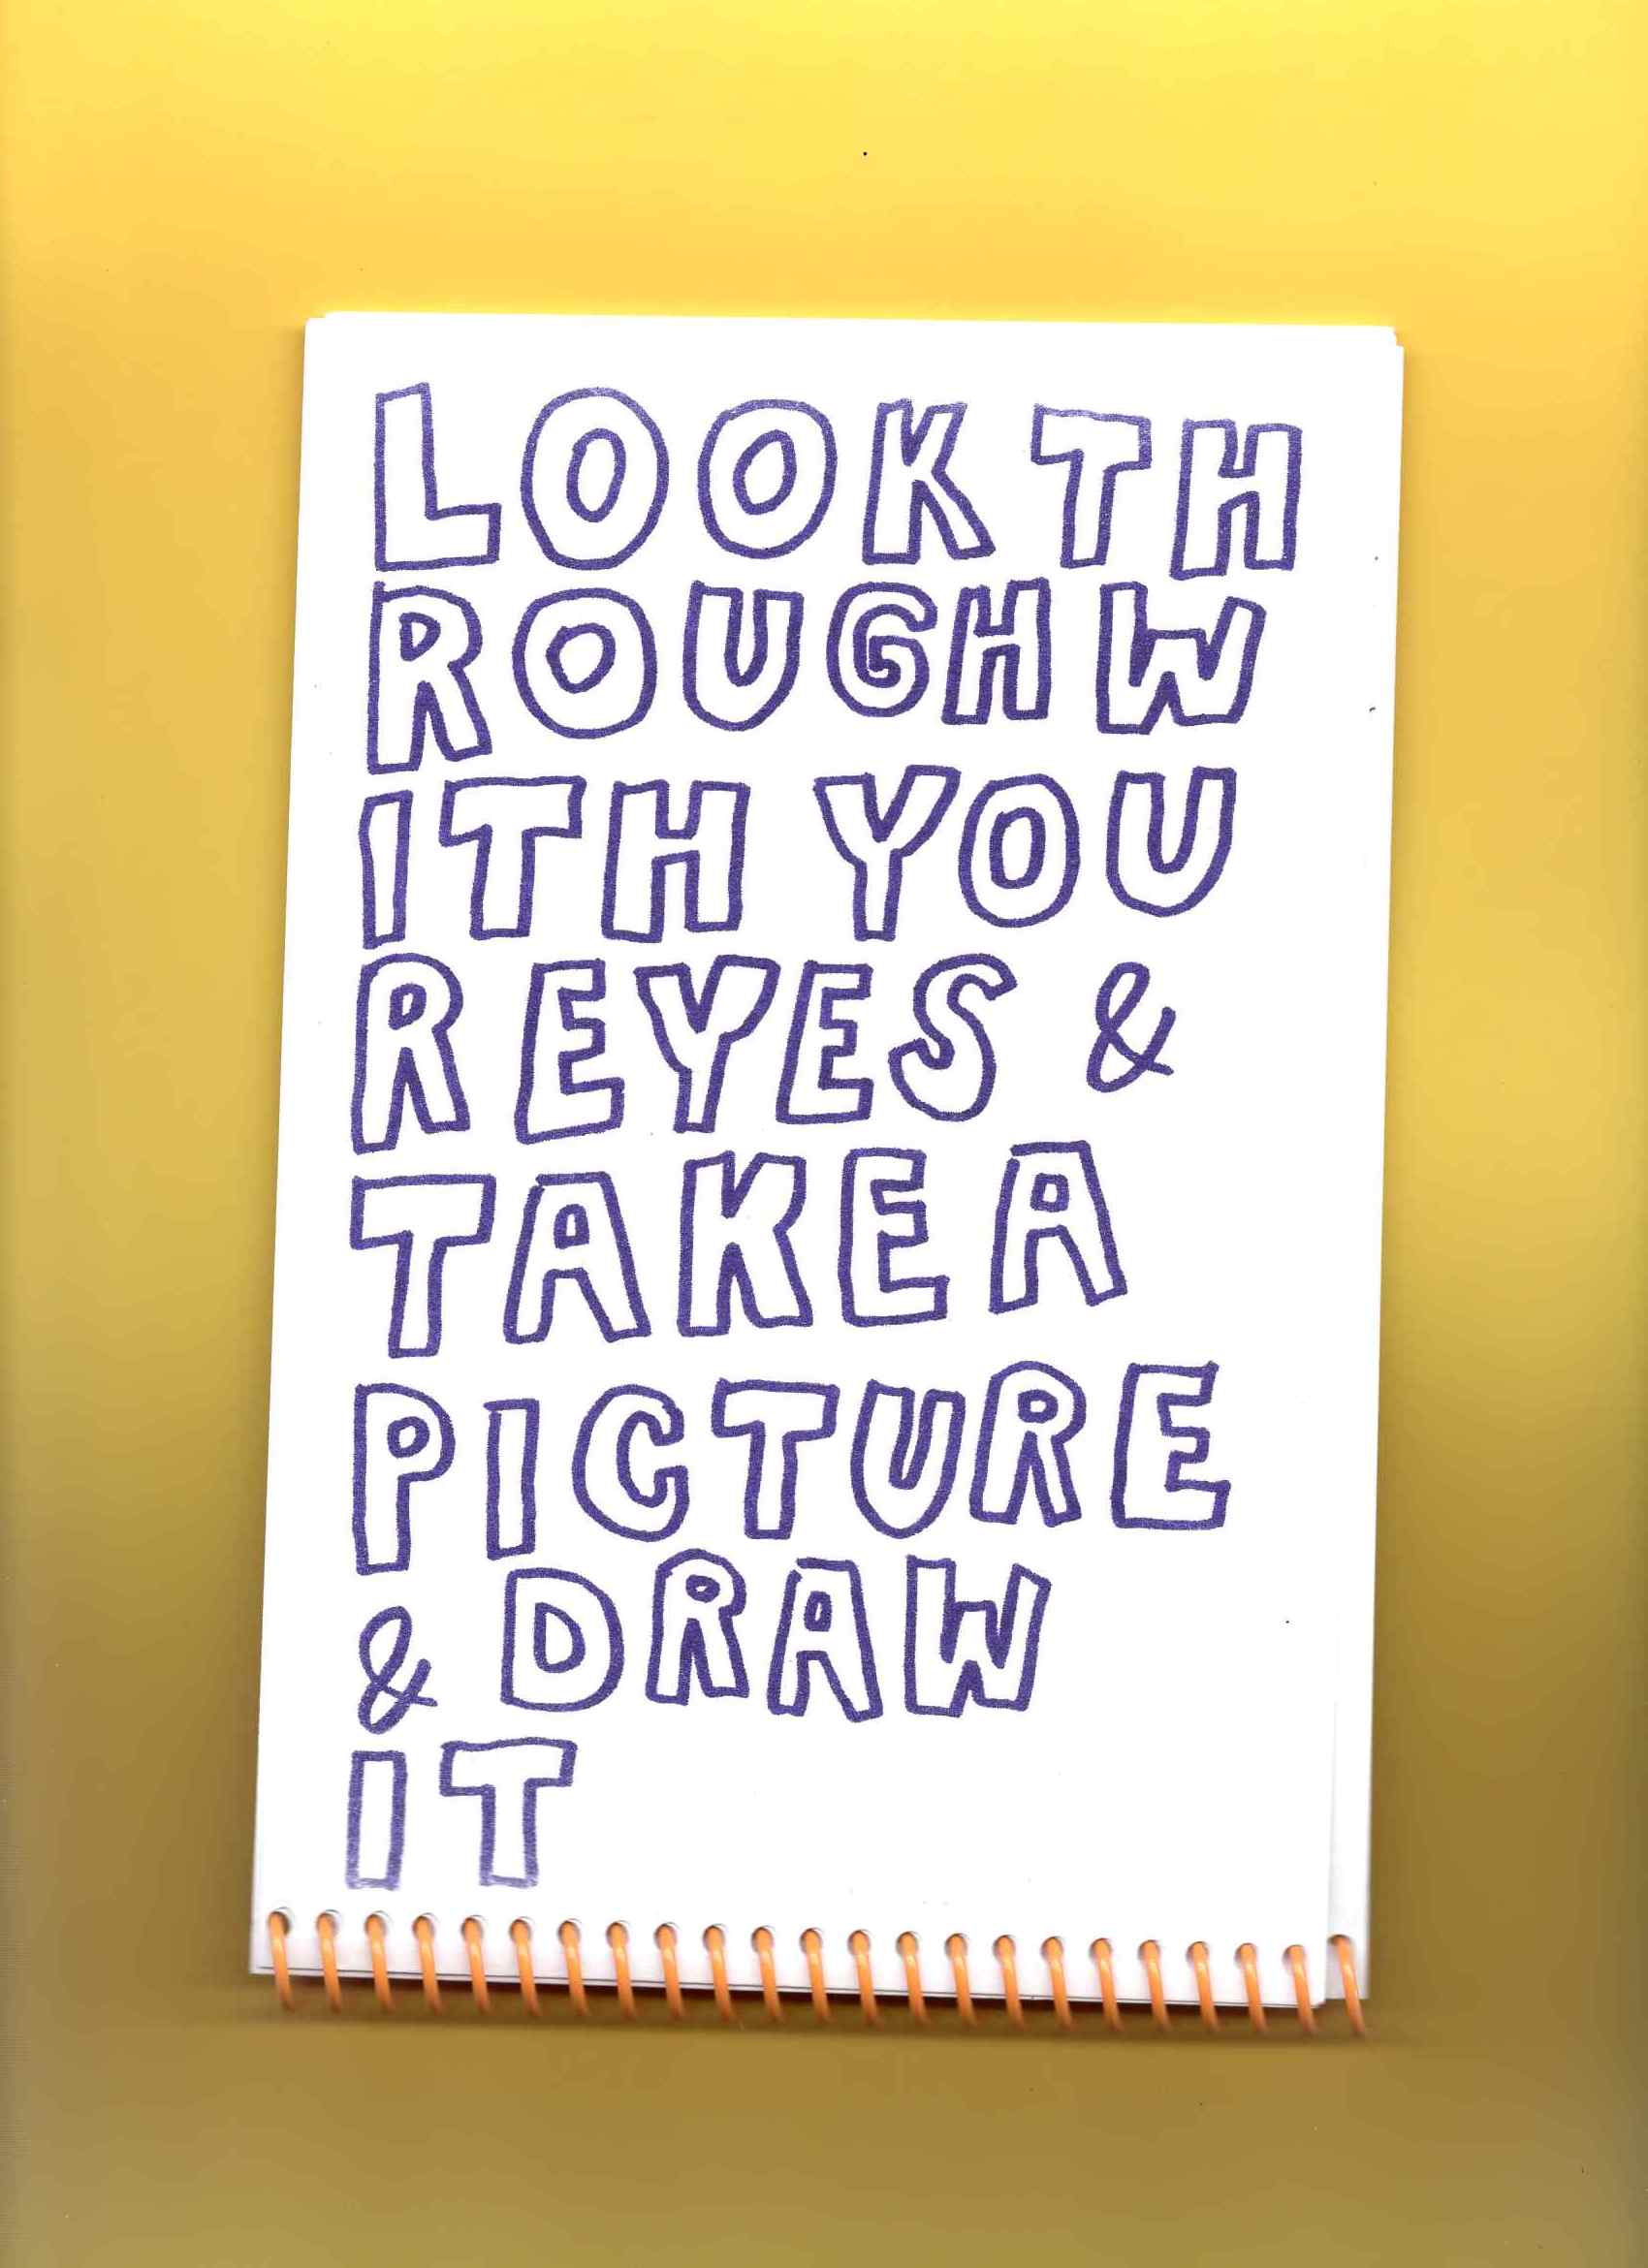 white spiral-bound notebook page that reads 'LOOK THROUGH WITH YOUR EYES & TAKE A PICTURE & DRAW IT' in purple bubble letters